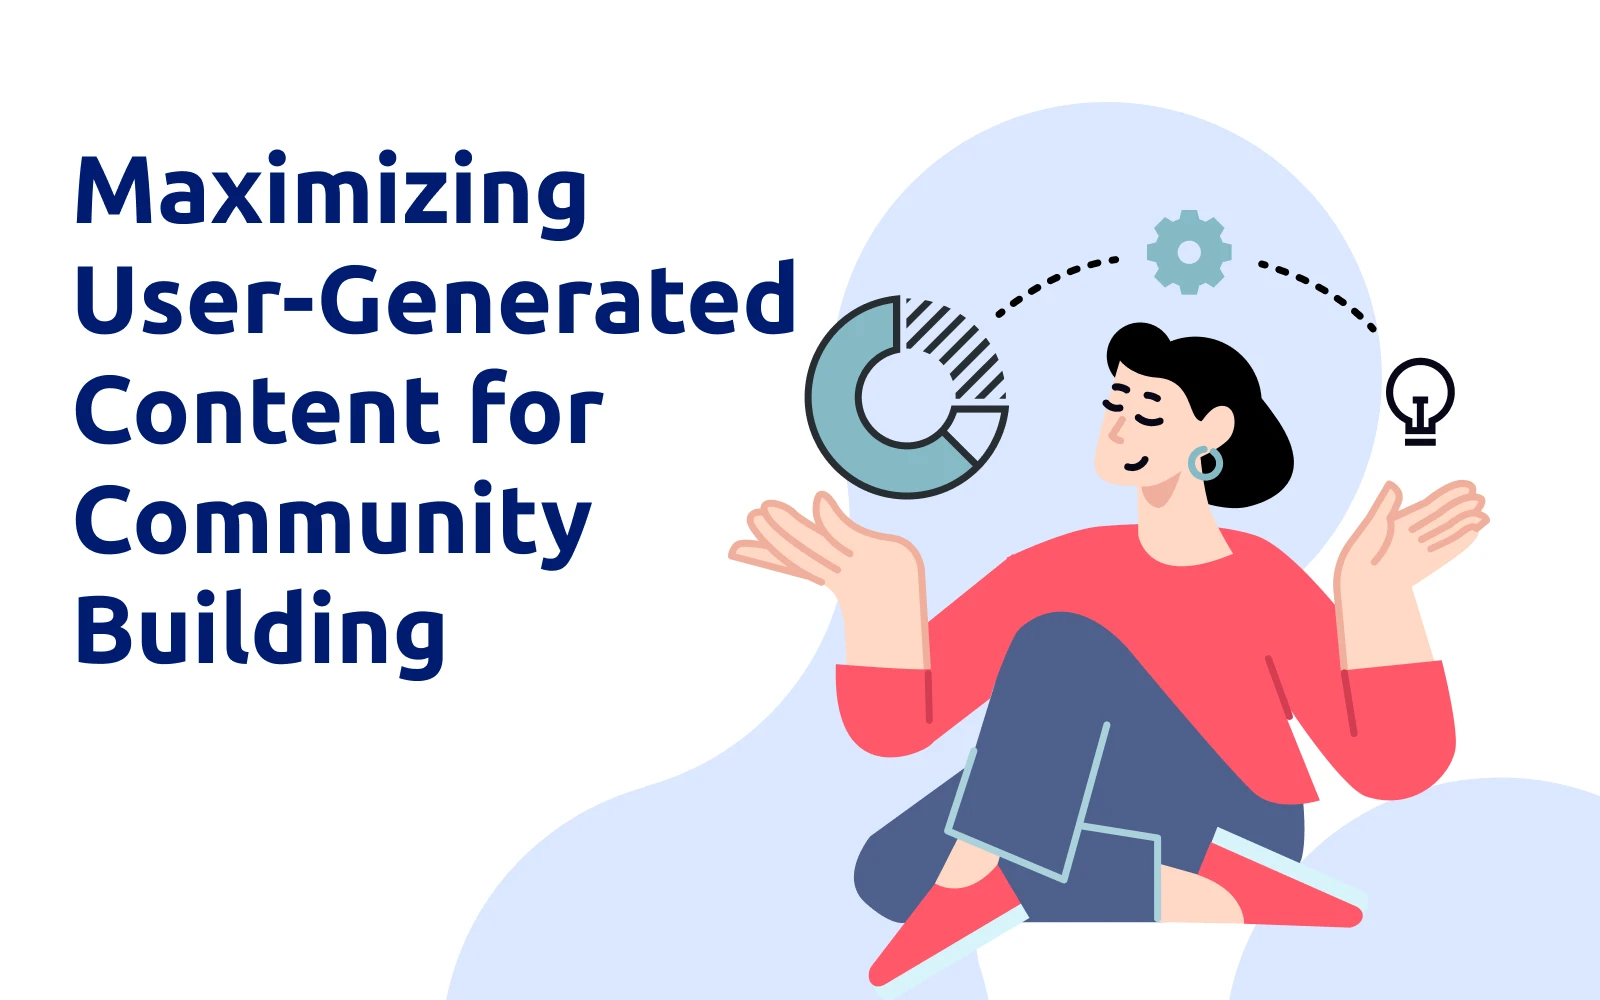 Maximizing User-Generated Content for Community Building